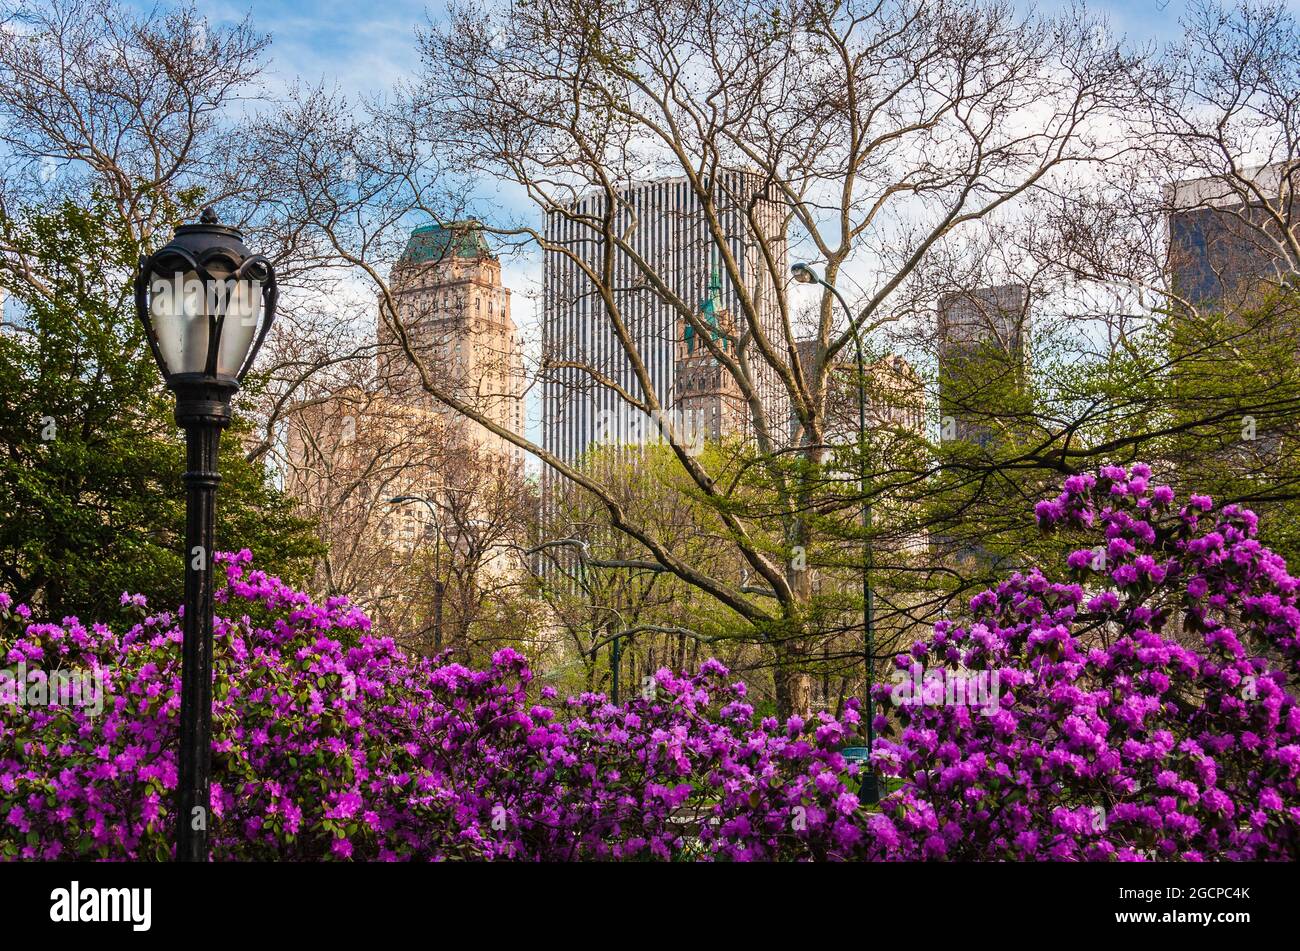 Flowers and budding trees in Central Park, New York City, NY, USA Stock Photo